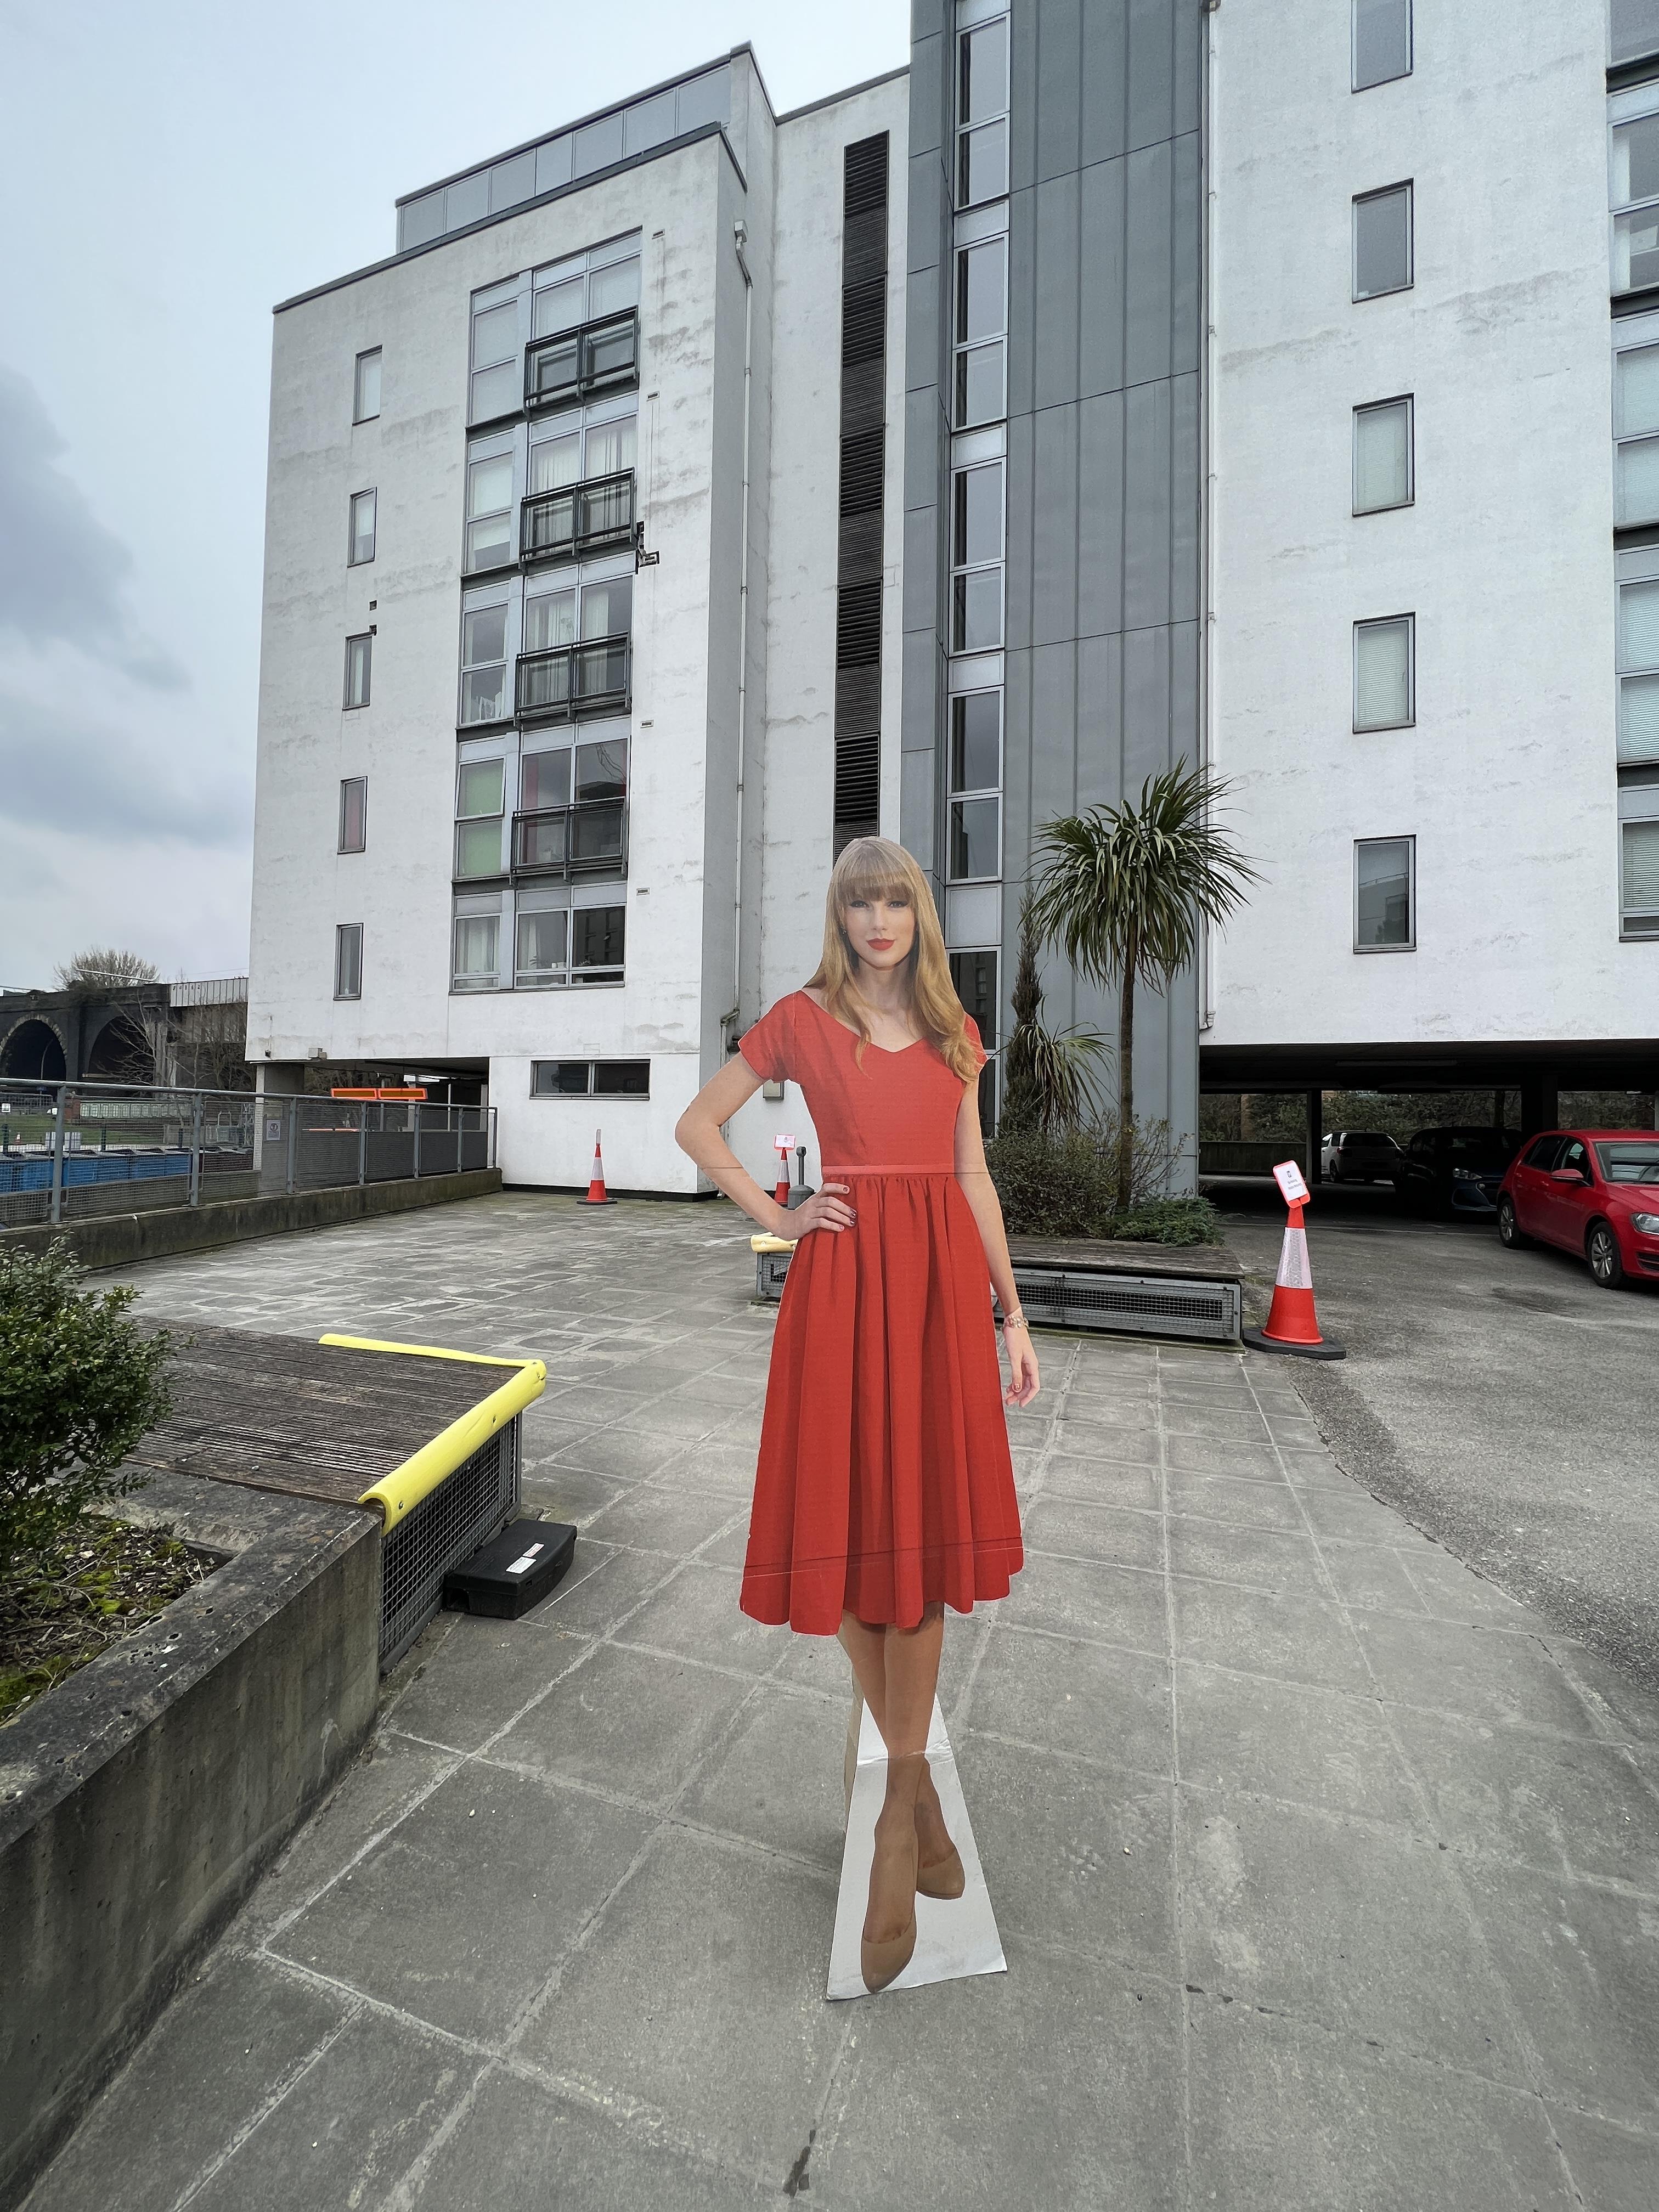 Manchester's iconic 'Tram Taylor' Swift cardboard cut-out is being  auctioned off for charity